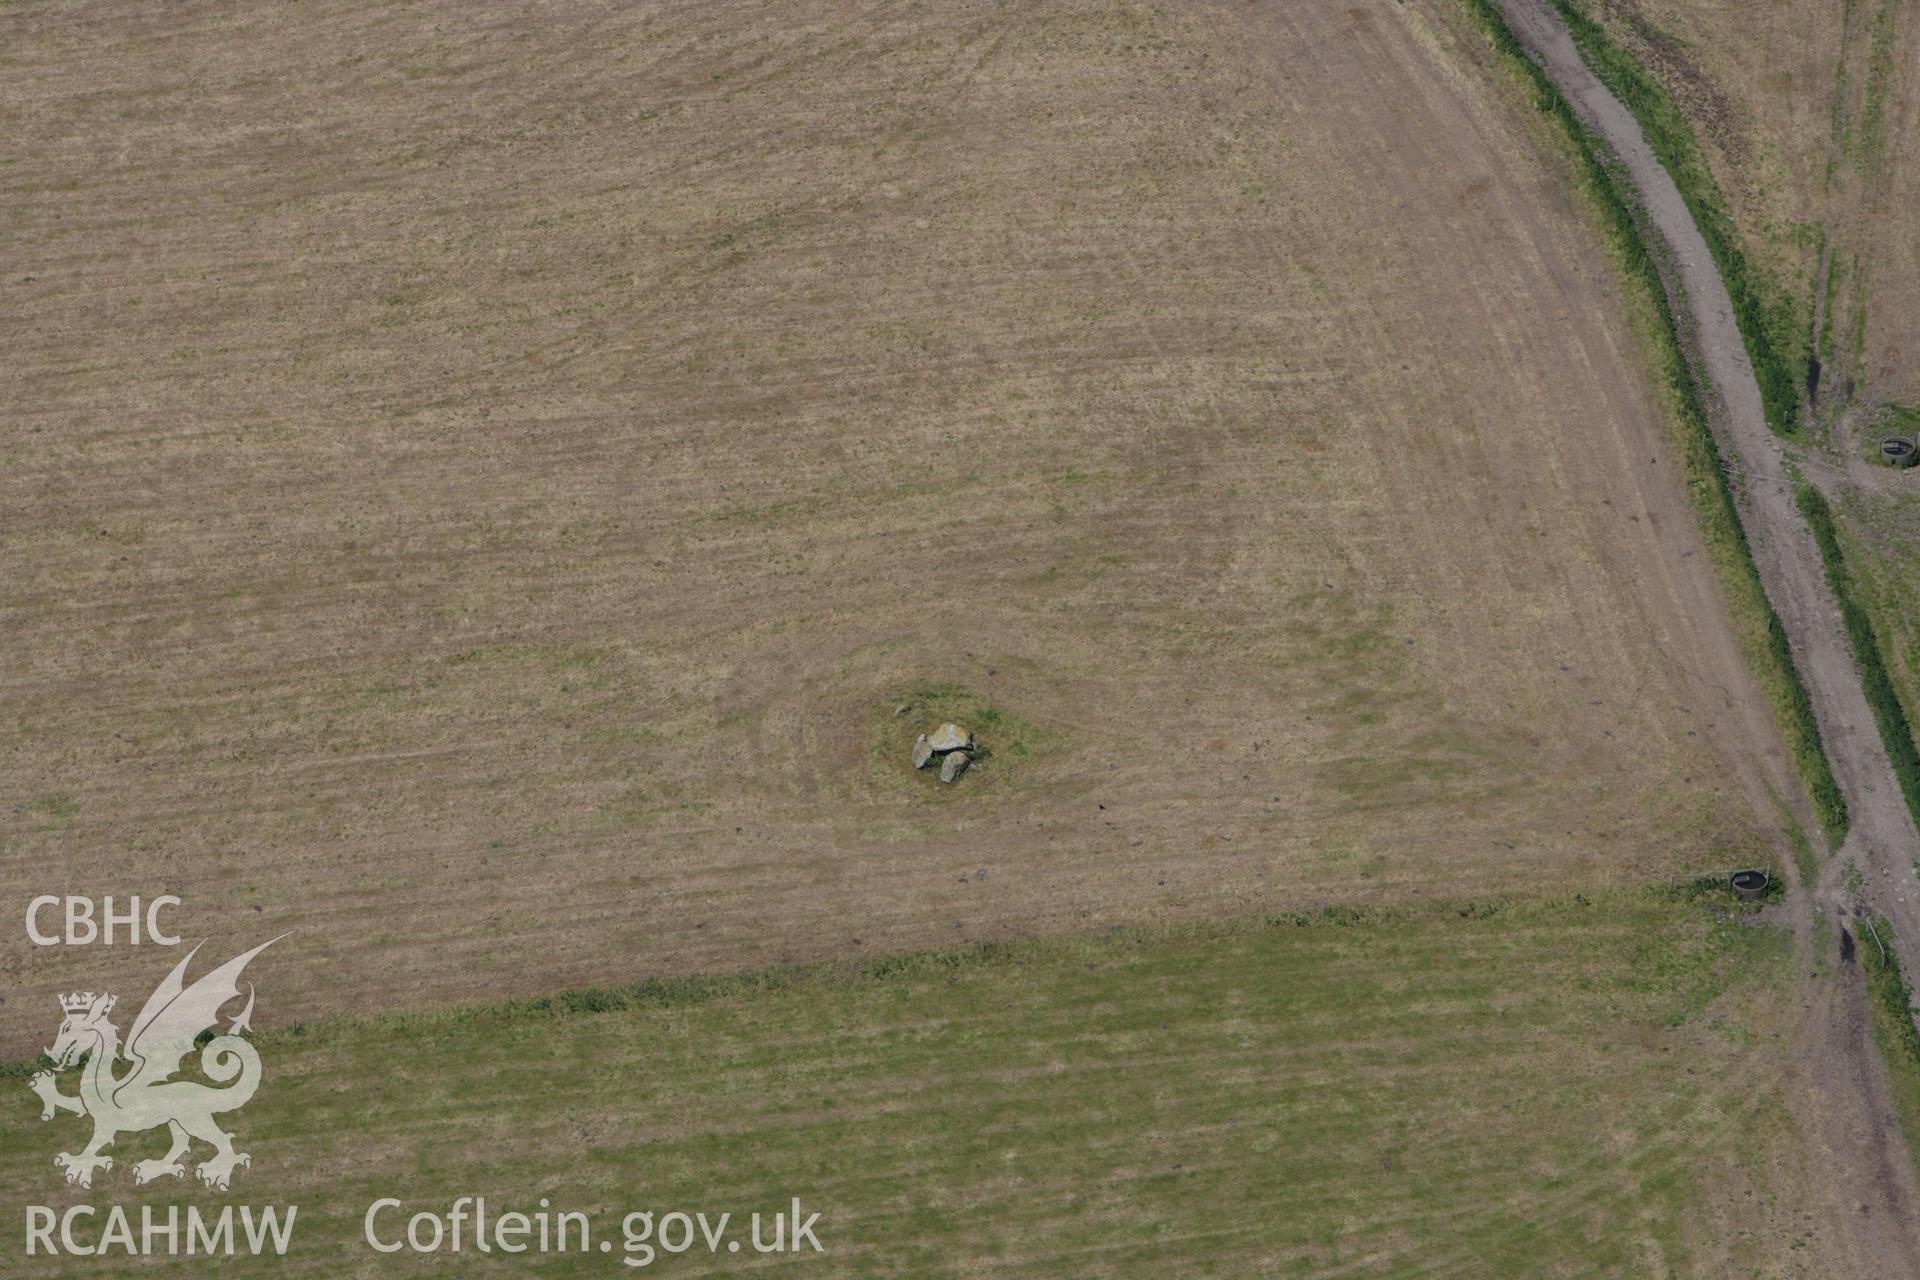 RCAHMW colour oblique aerial photograph of Trellyffaint Burial Chamber. Taken on 01 June 2009 by Toby Driver